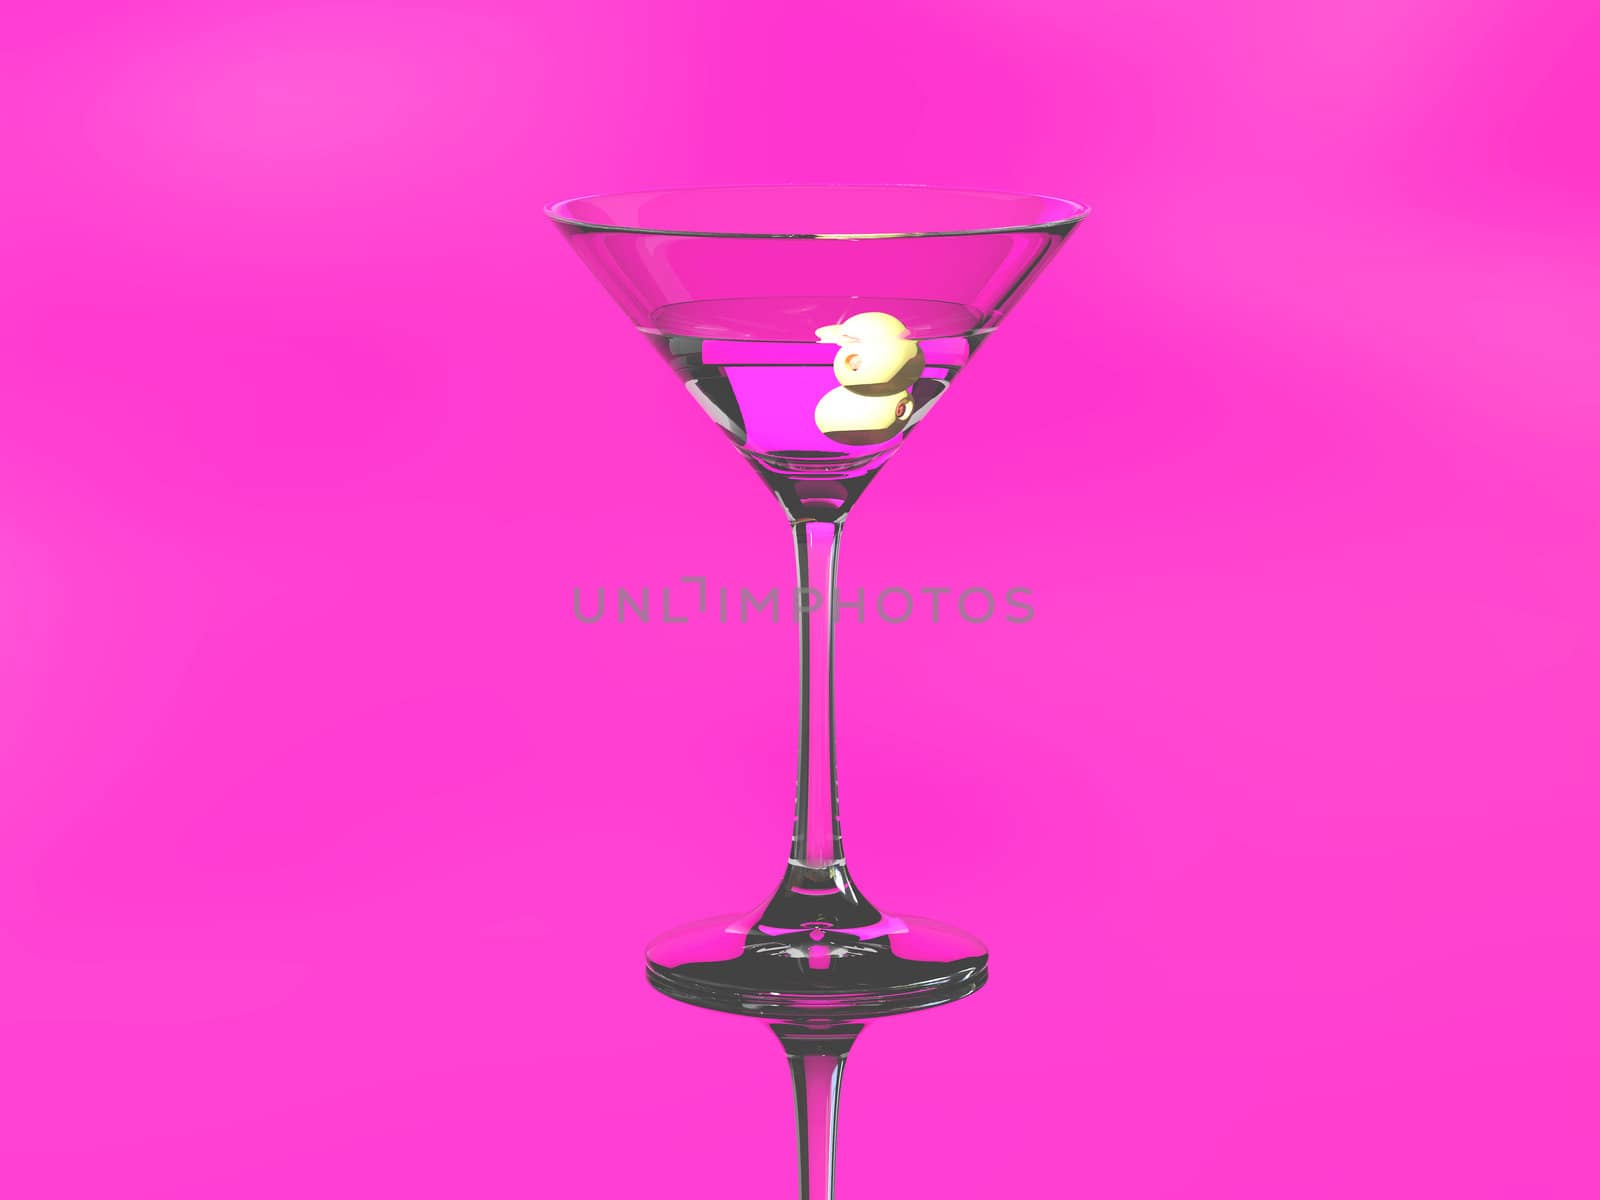 High resolution image glass of martini. 3d illustration. Martini glass on table in purple light